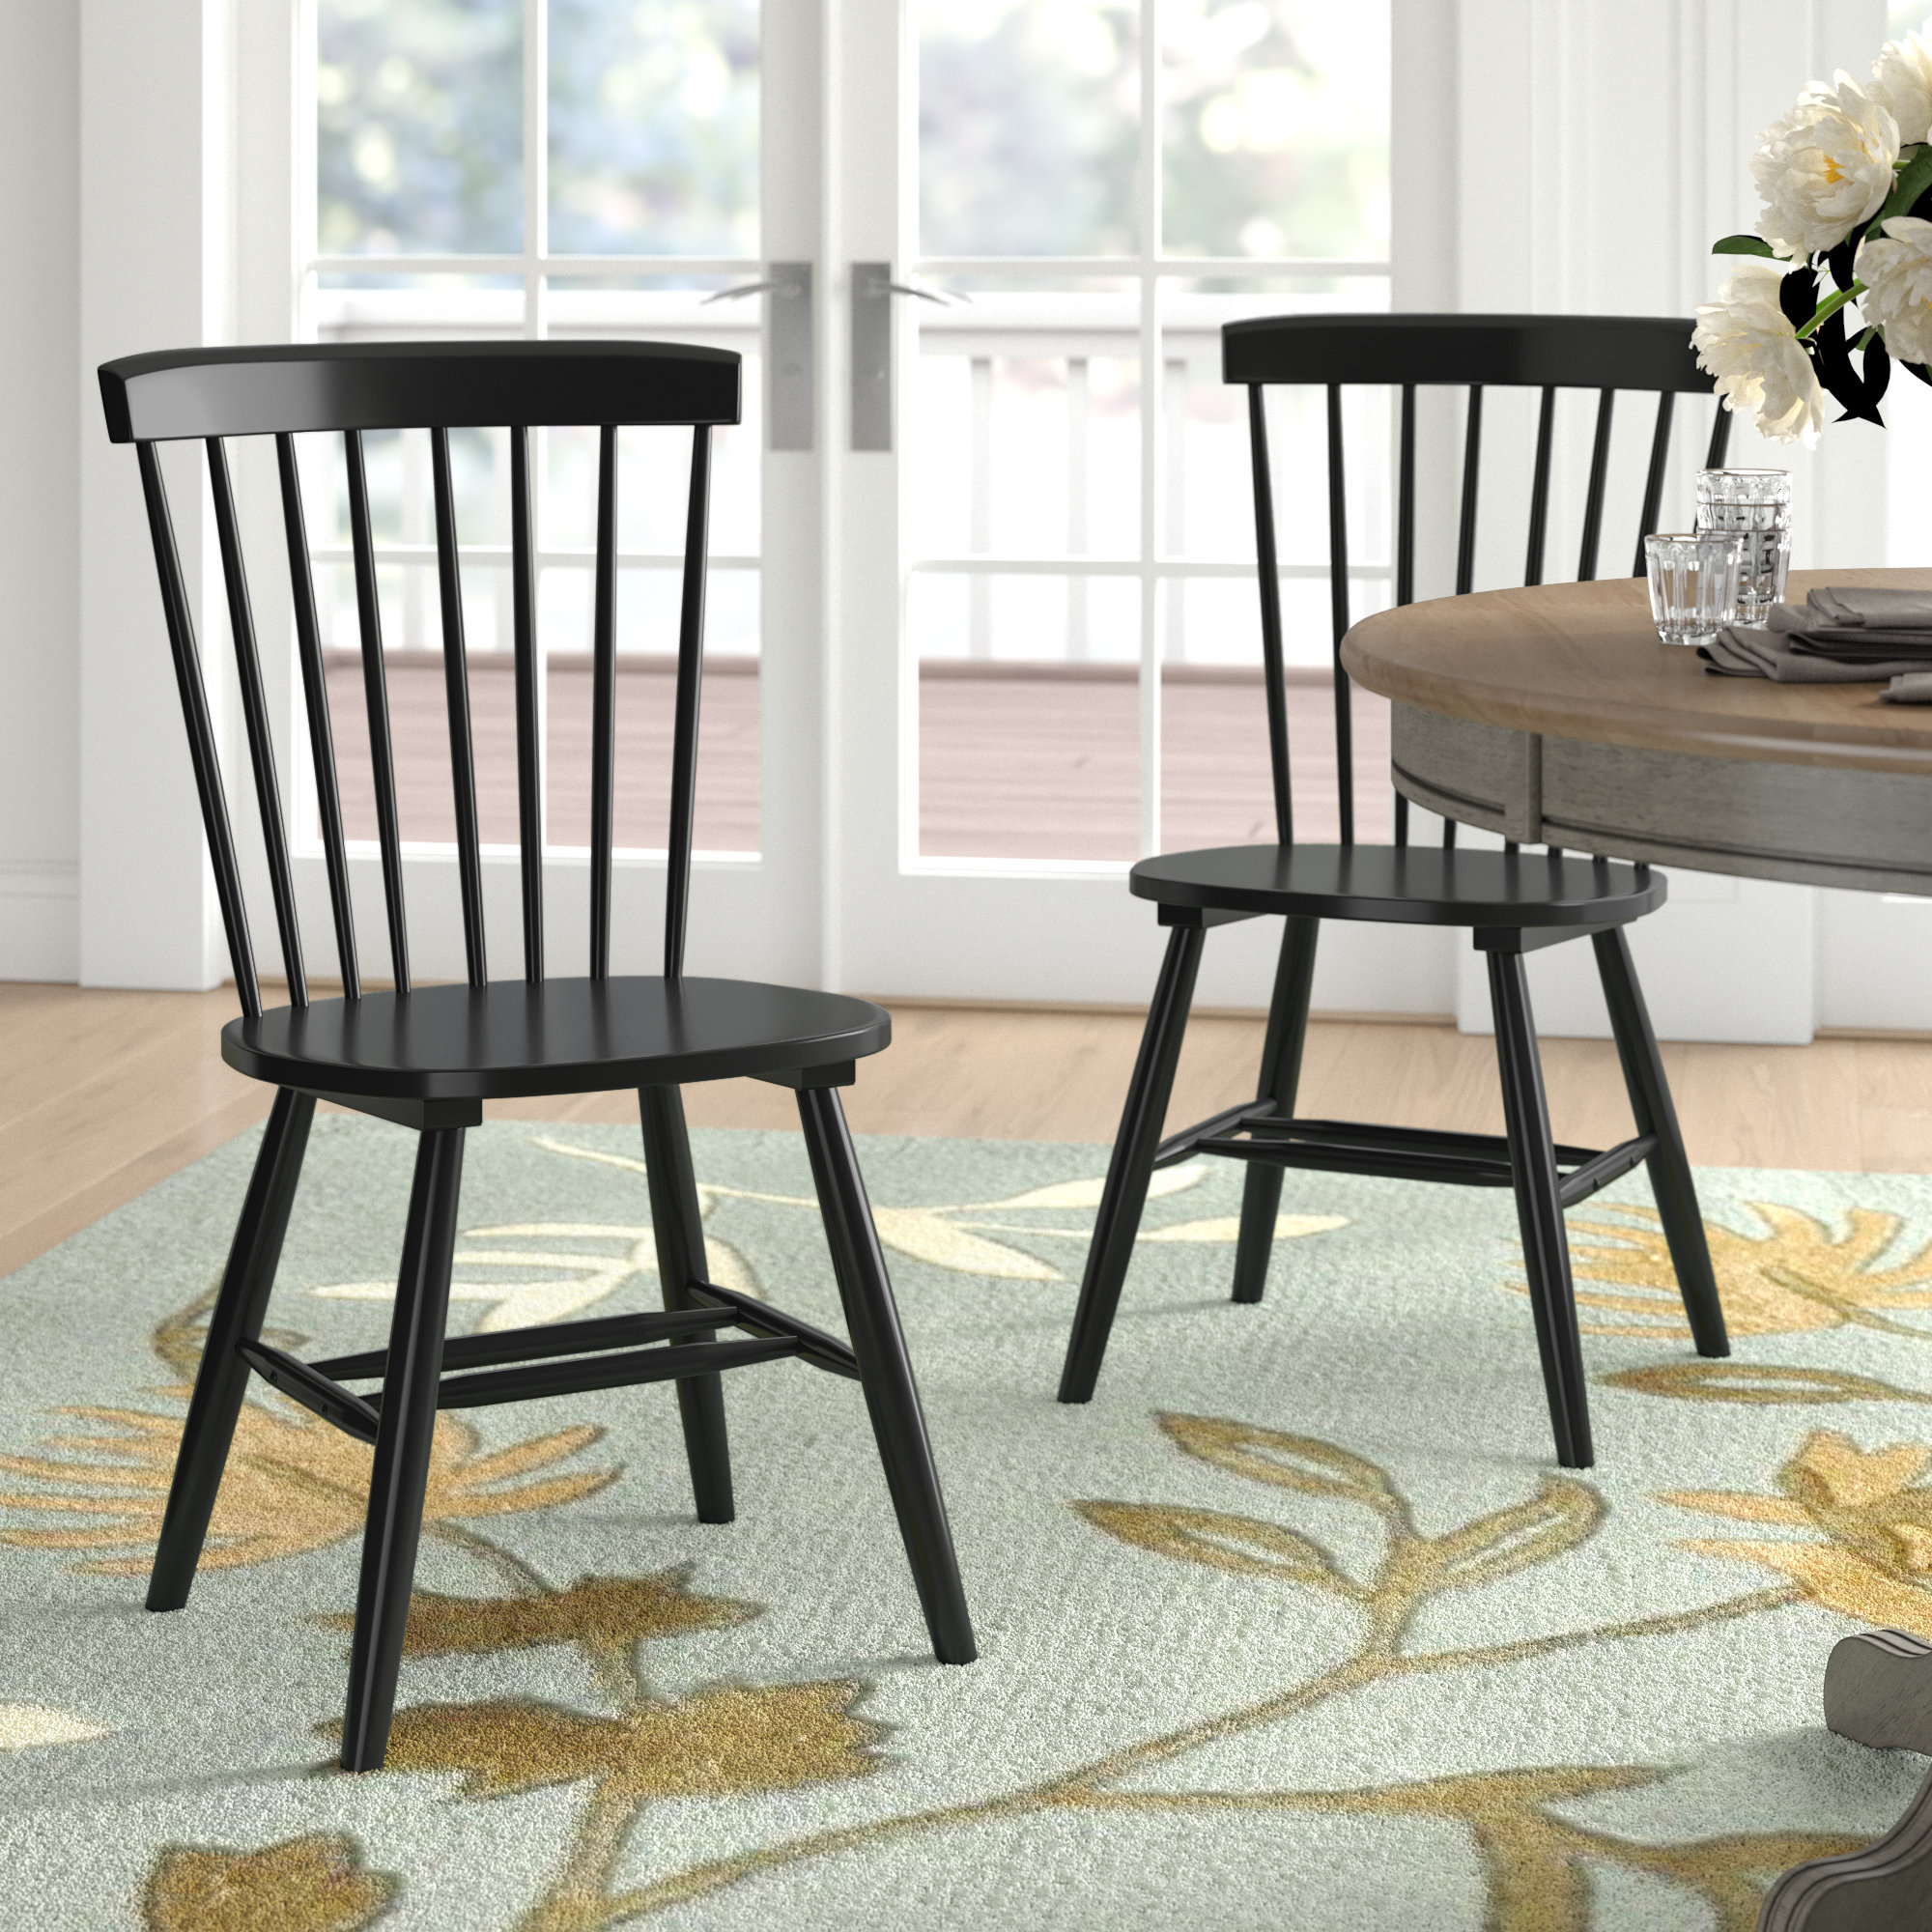 Dining Chairs  Ontario Straight-Backed Wood Kitchen Chairs